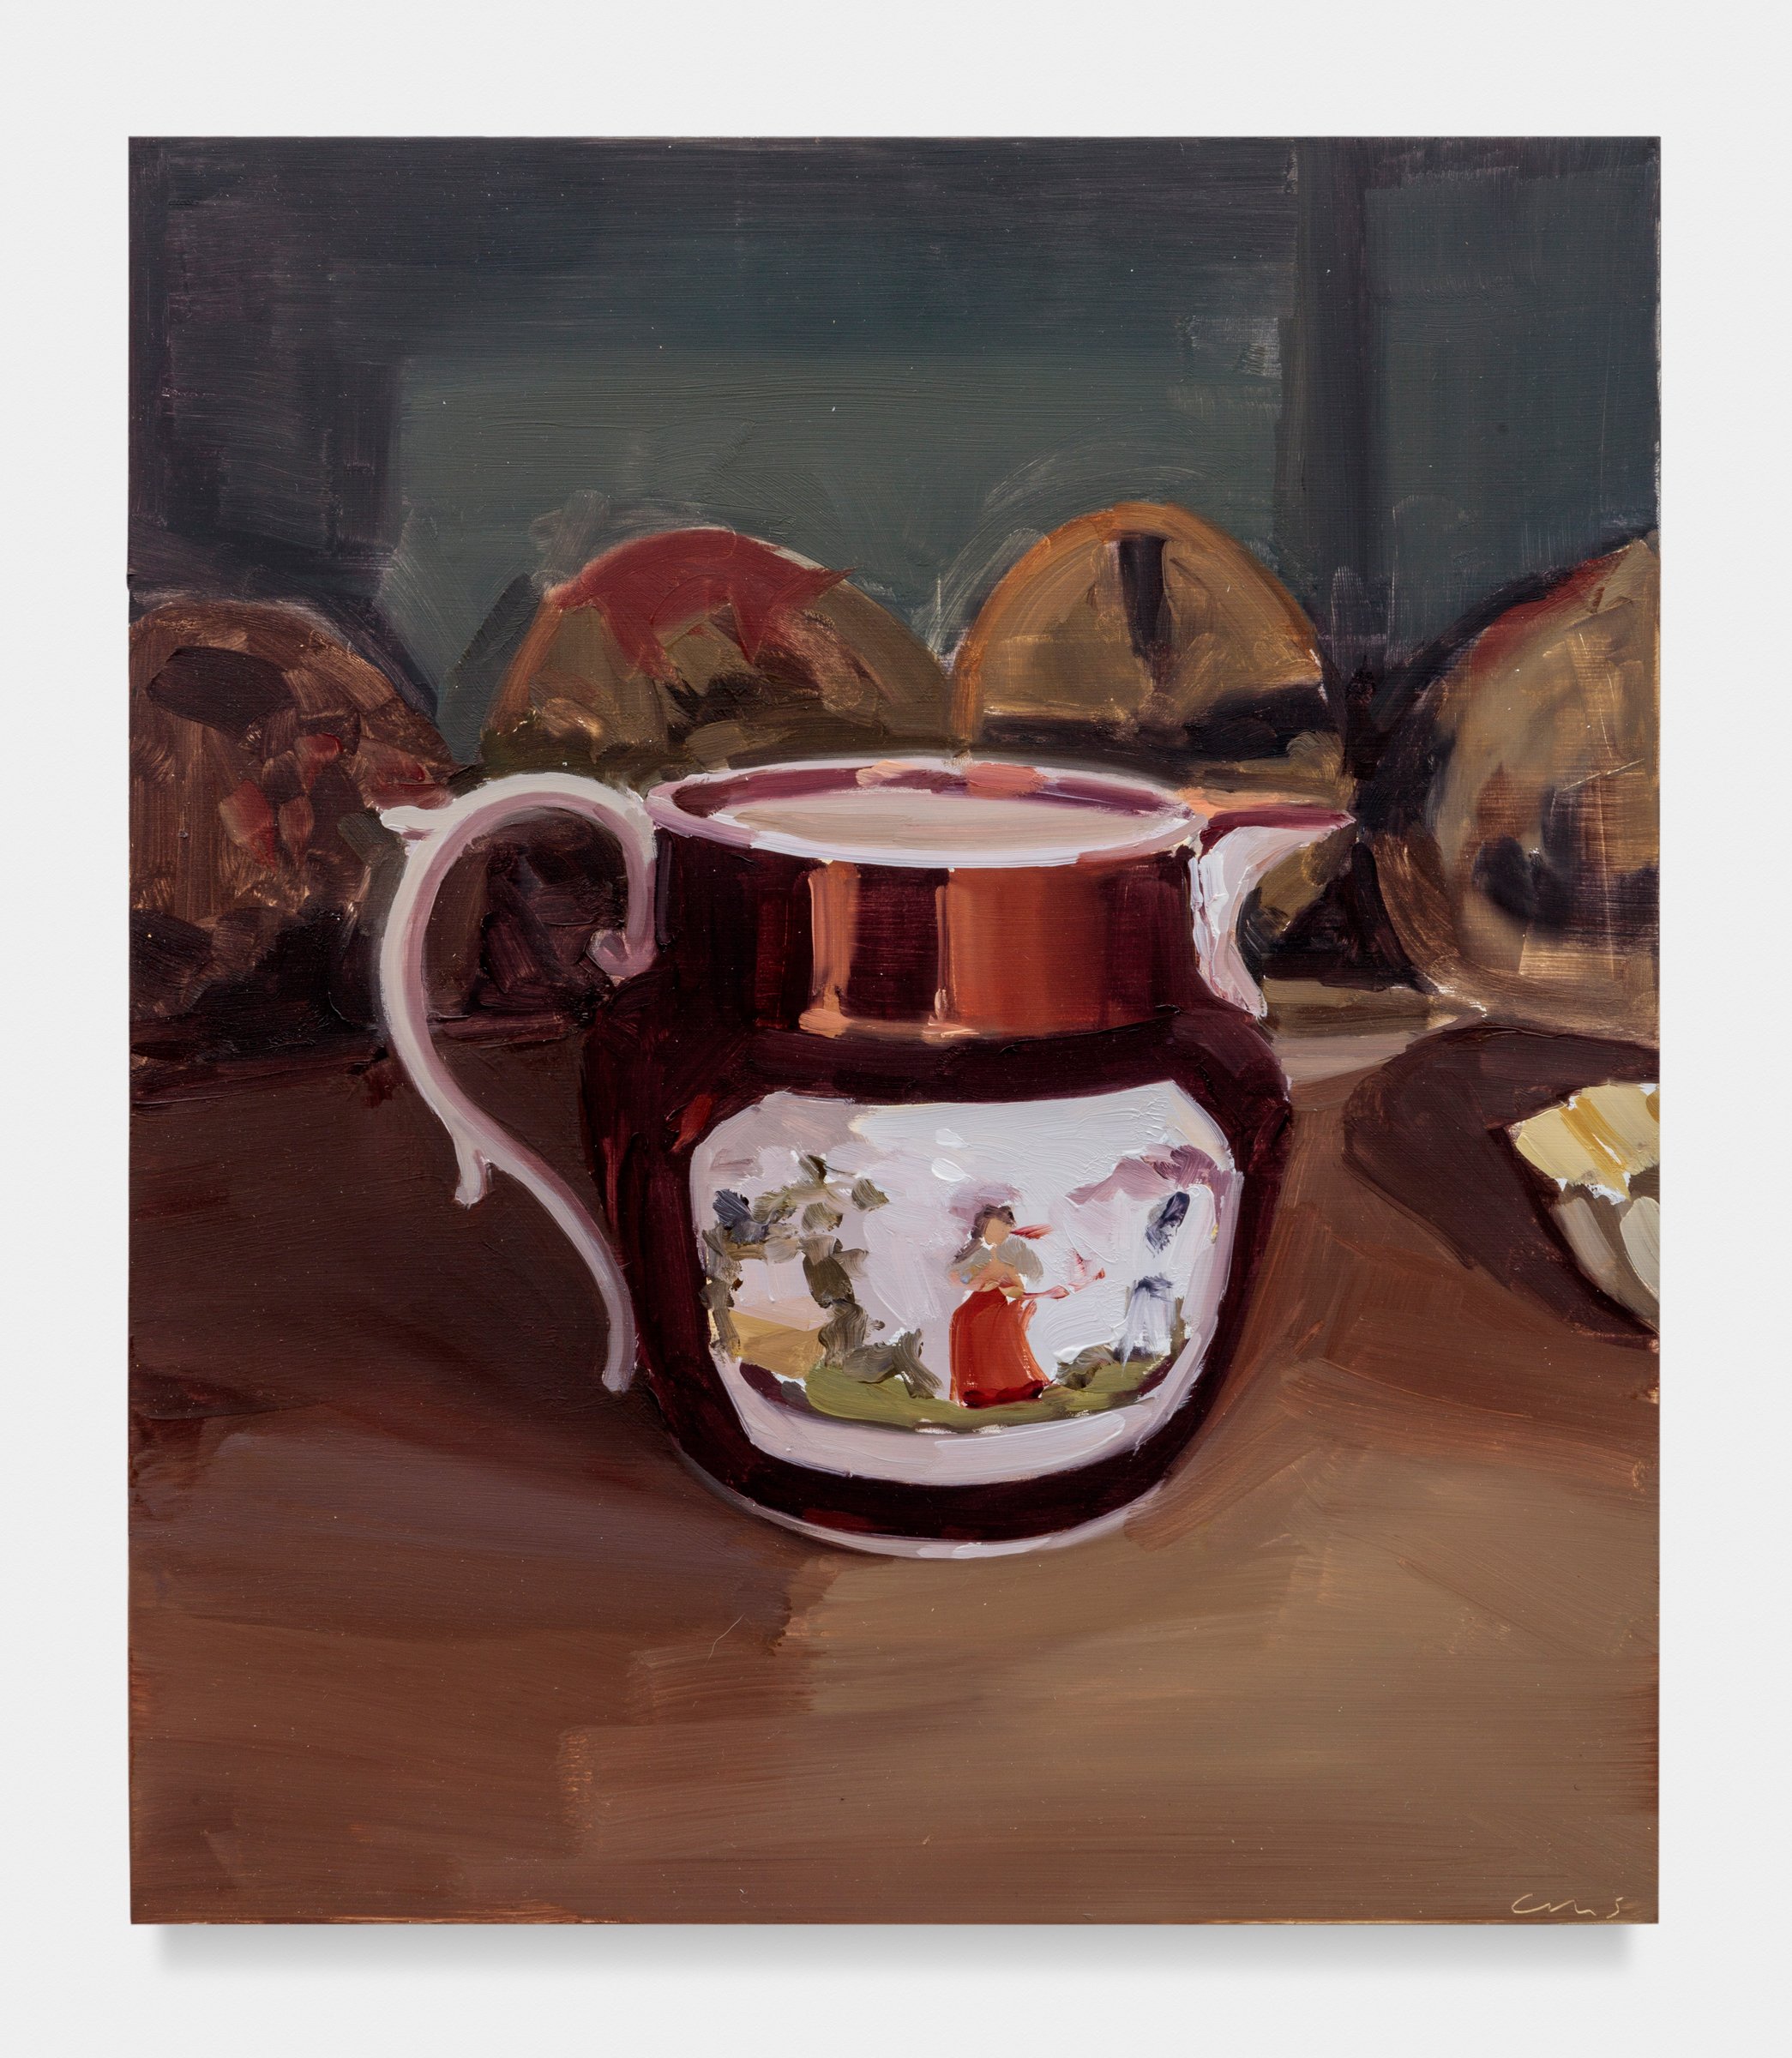  Carrie Mae Smith Lusterware Pitcher 1 2022 Oil on ACM panel (Aluminum Composite Material) 14h x 12w in 35.56h x 30.48w cm 